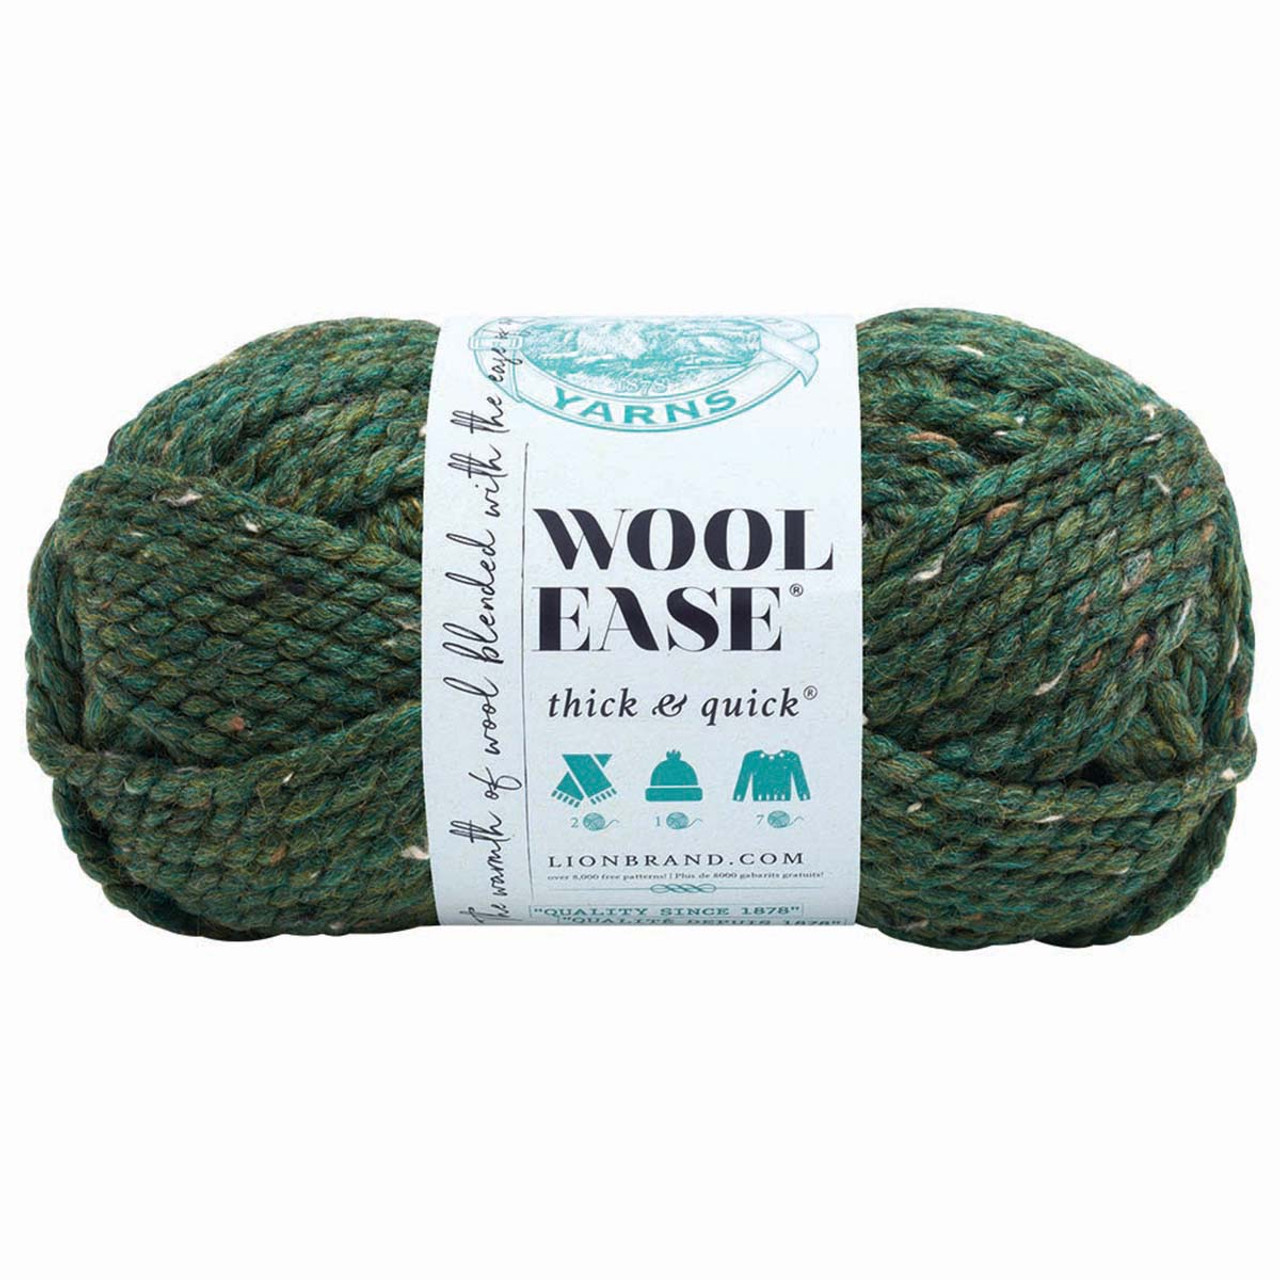 Lion Brand Wool Ease Thick & Quick Yarn - Grass